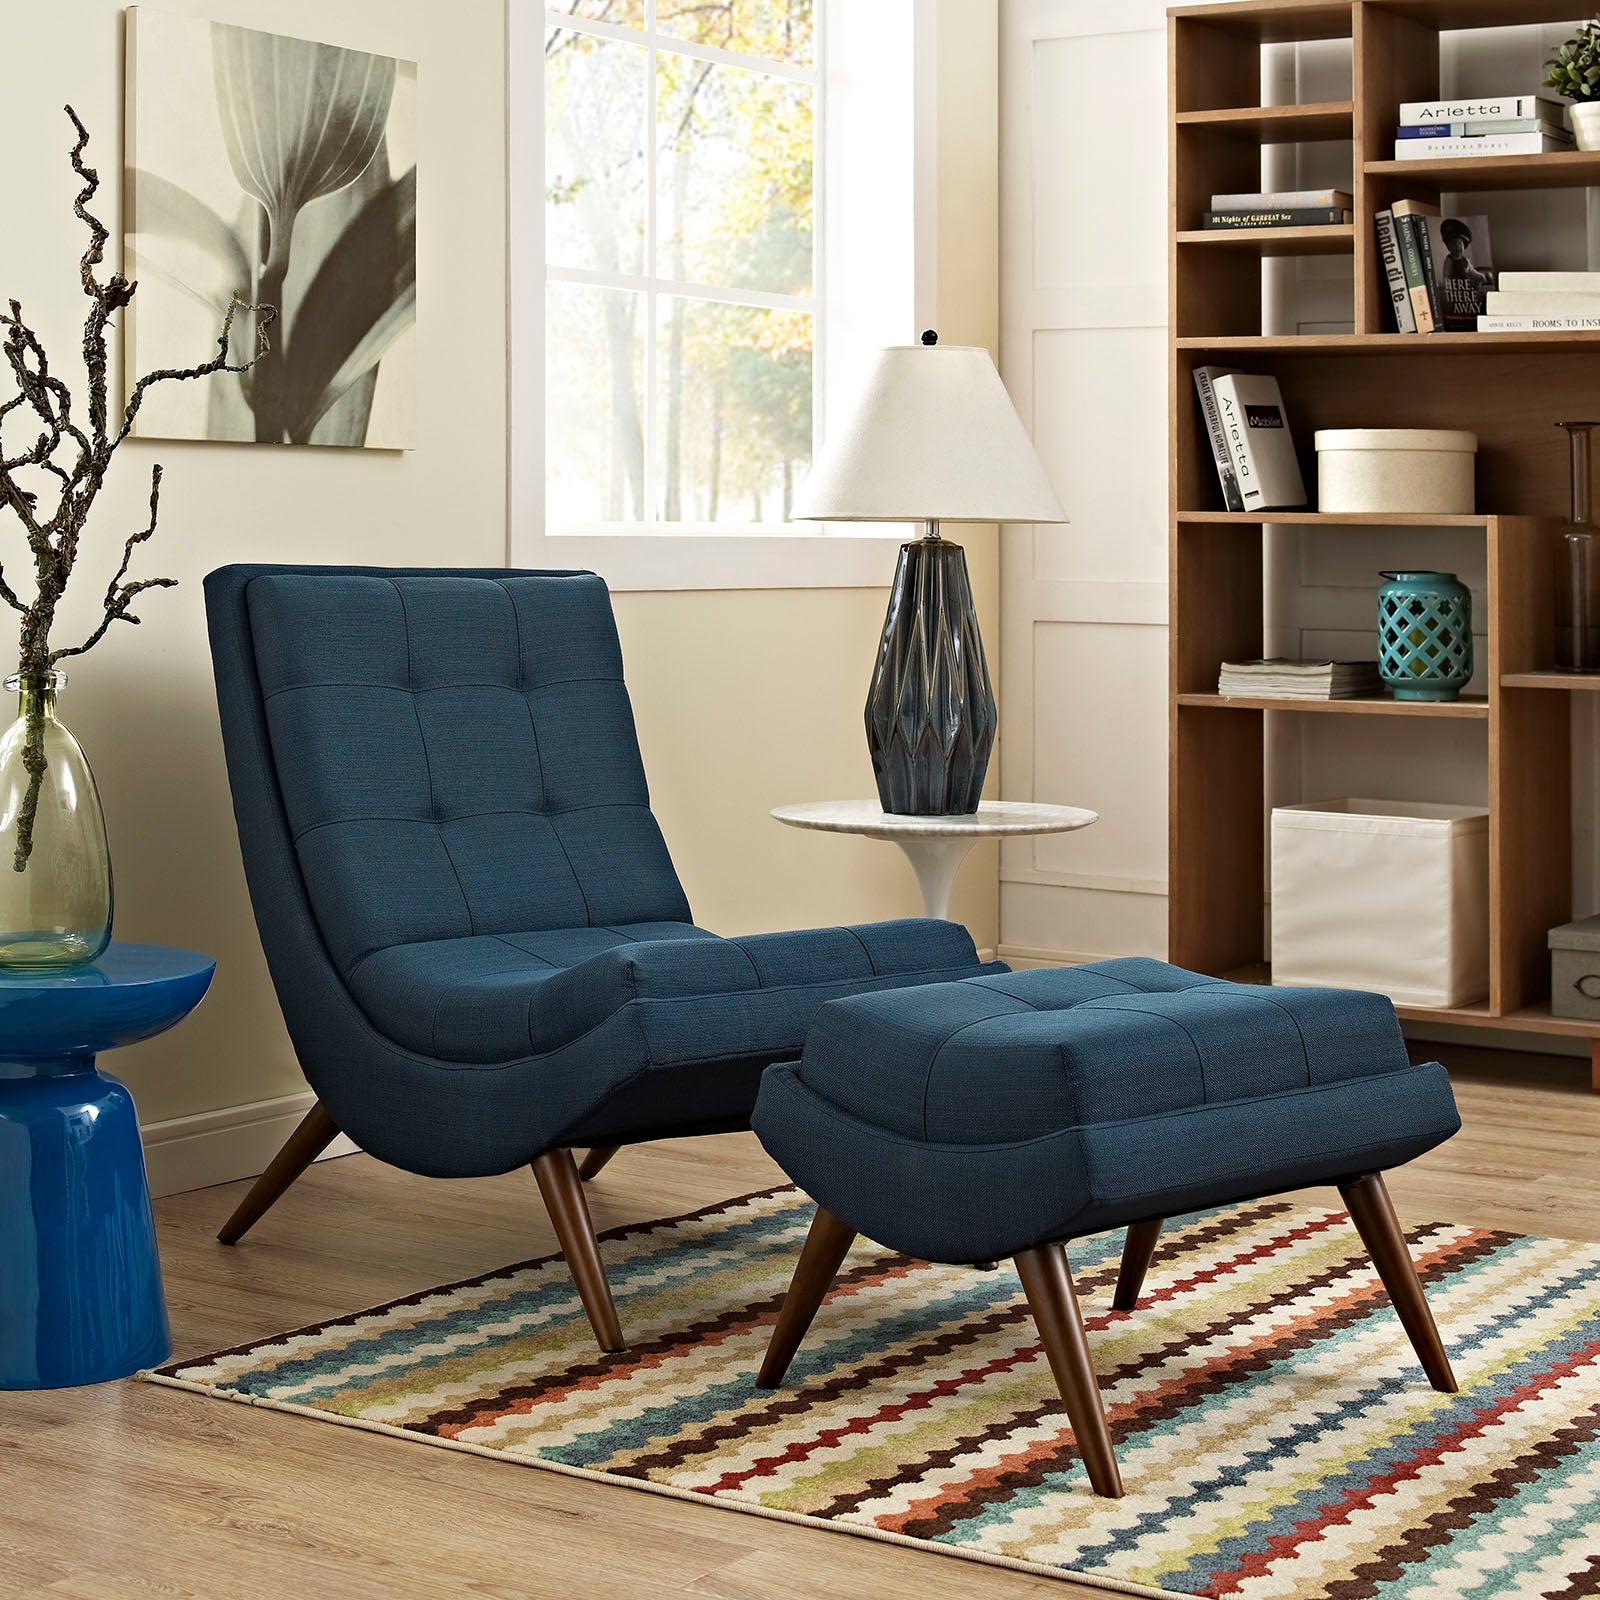 Modway Living Room Sets - Ramp Upholstered Fabric Lounge Chair Set Azure